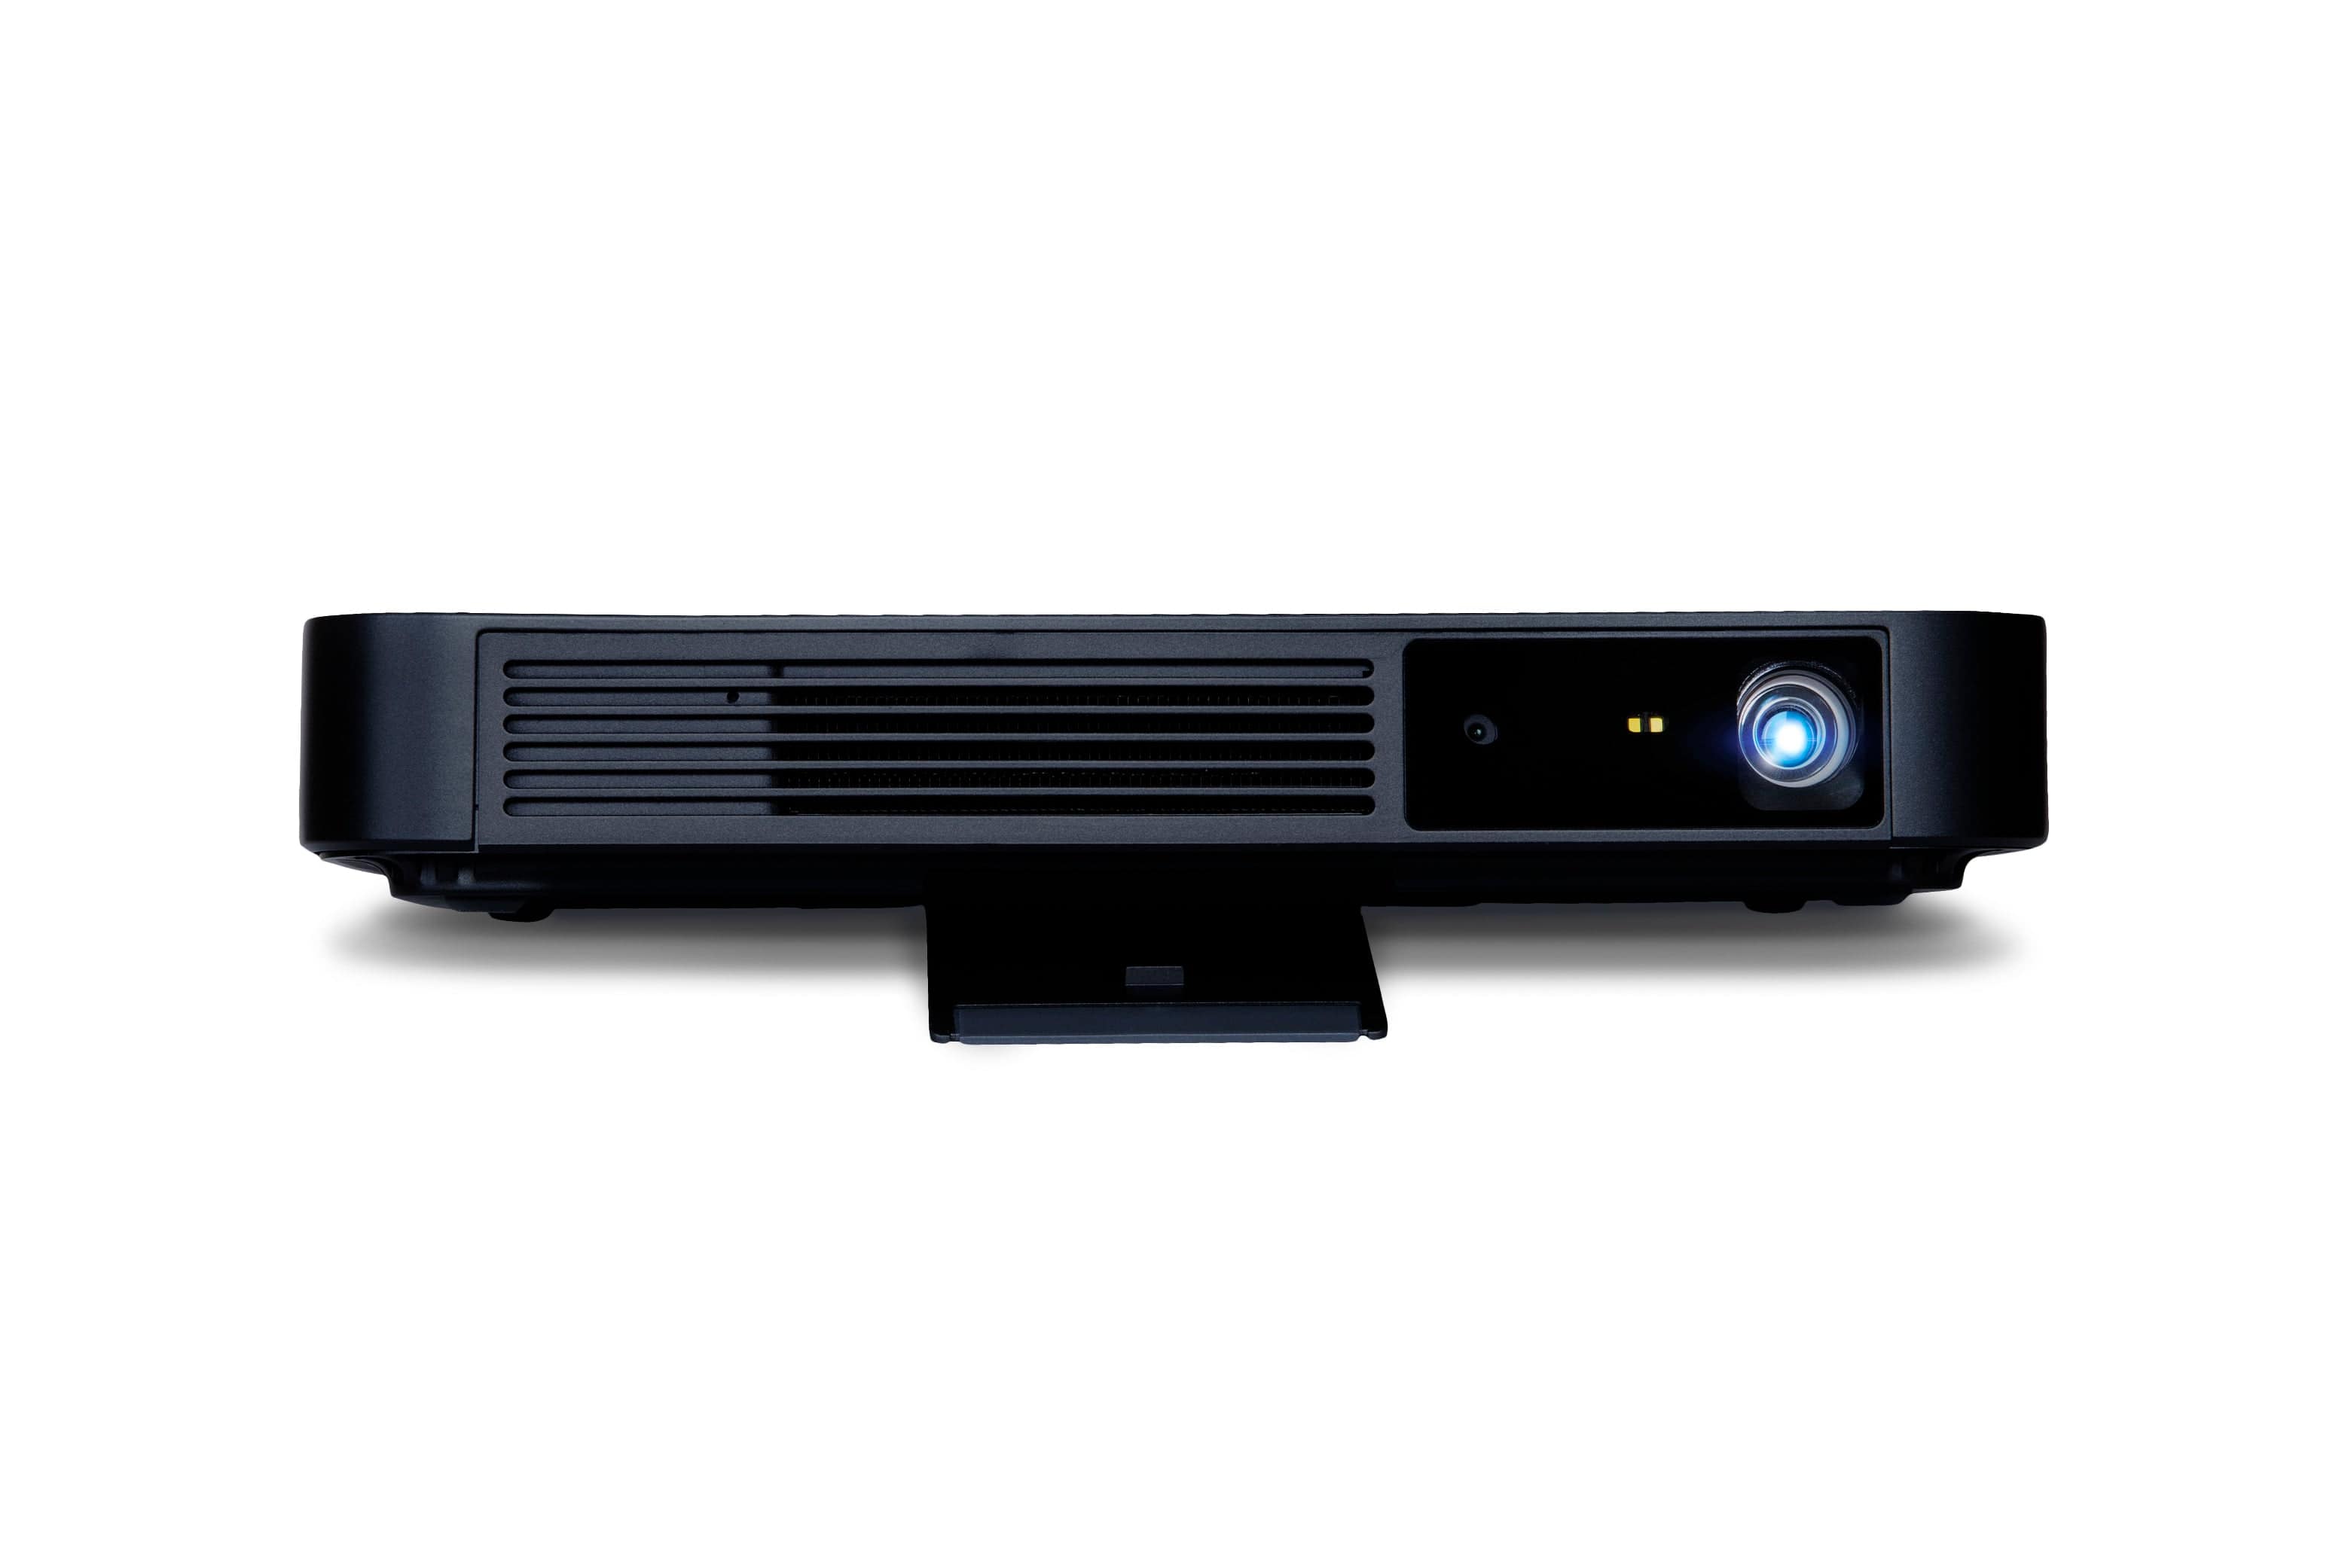 Miroir M700S 1080p Smart Portable Projector, Built-in Streaming Home Theater. HDR HDMI, Dolby and DTS, Built-in Speaker. 5G WiFi and Bluetooth